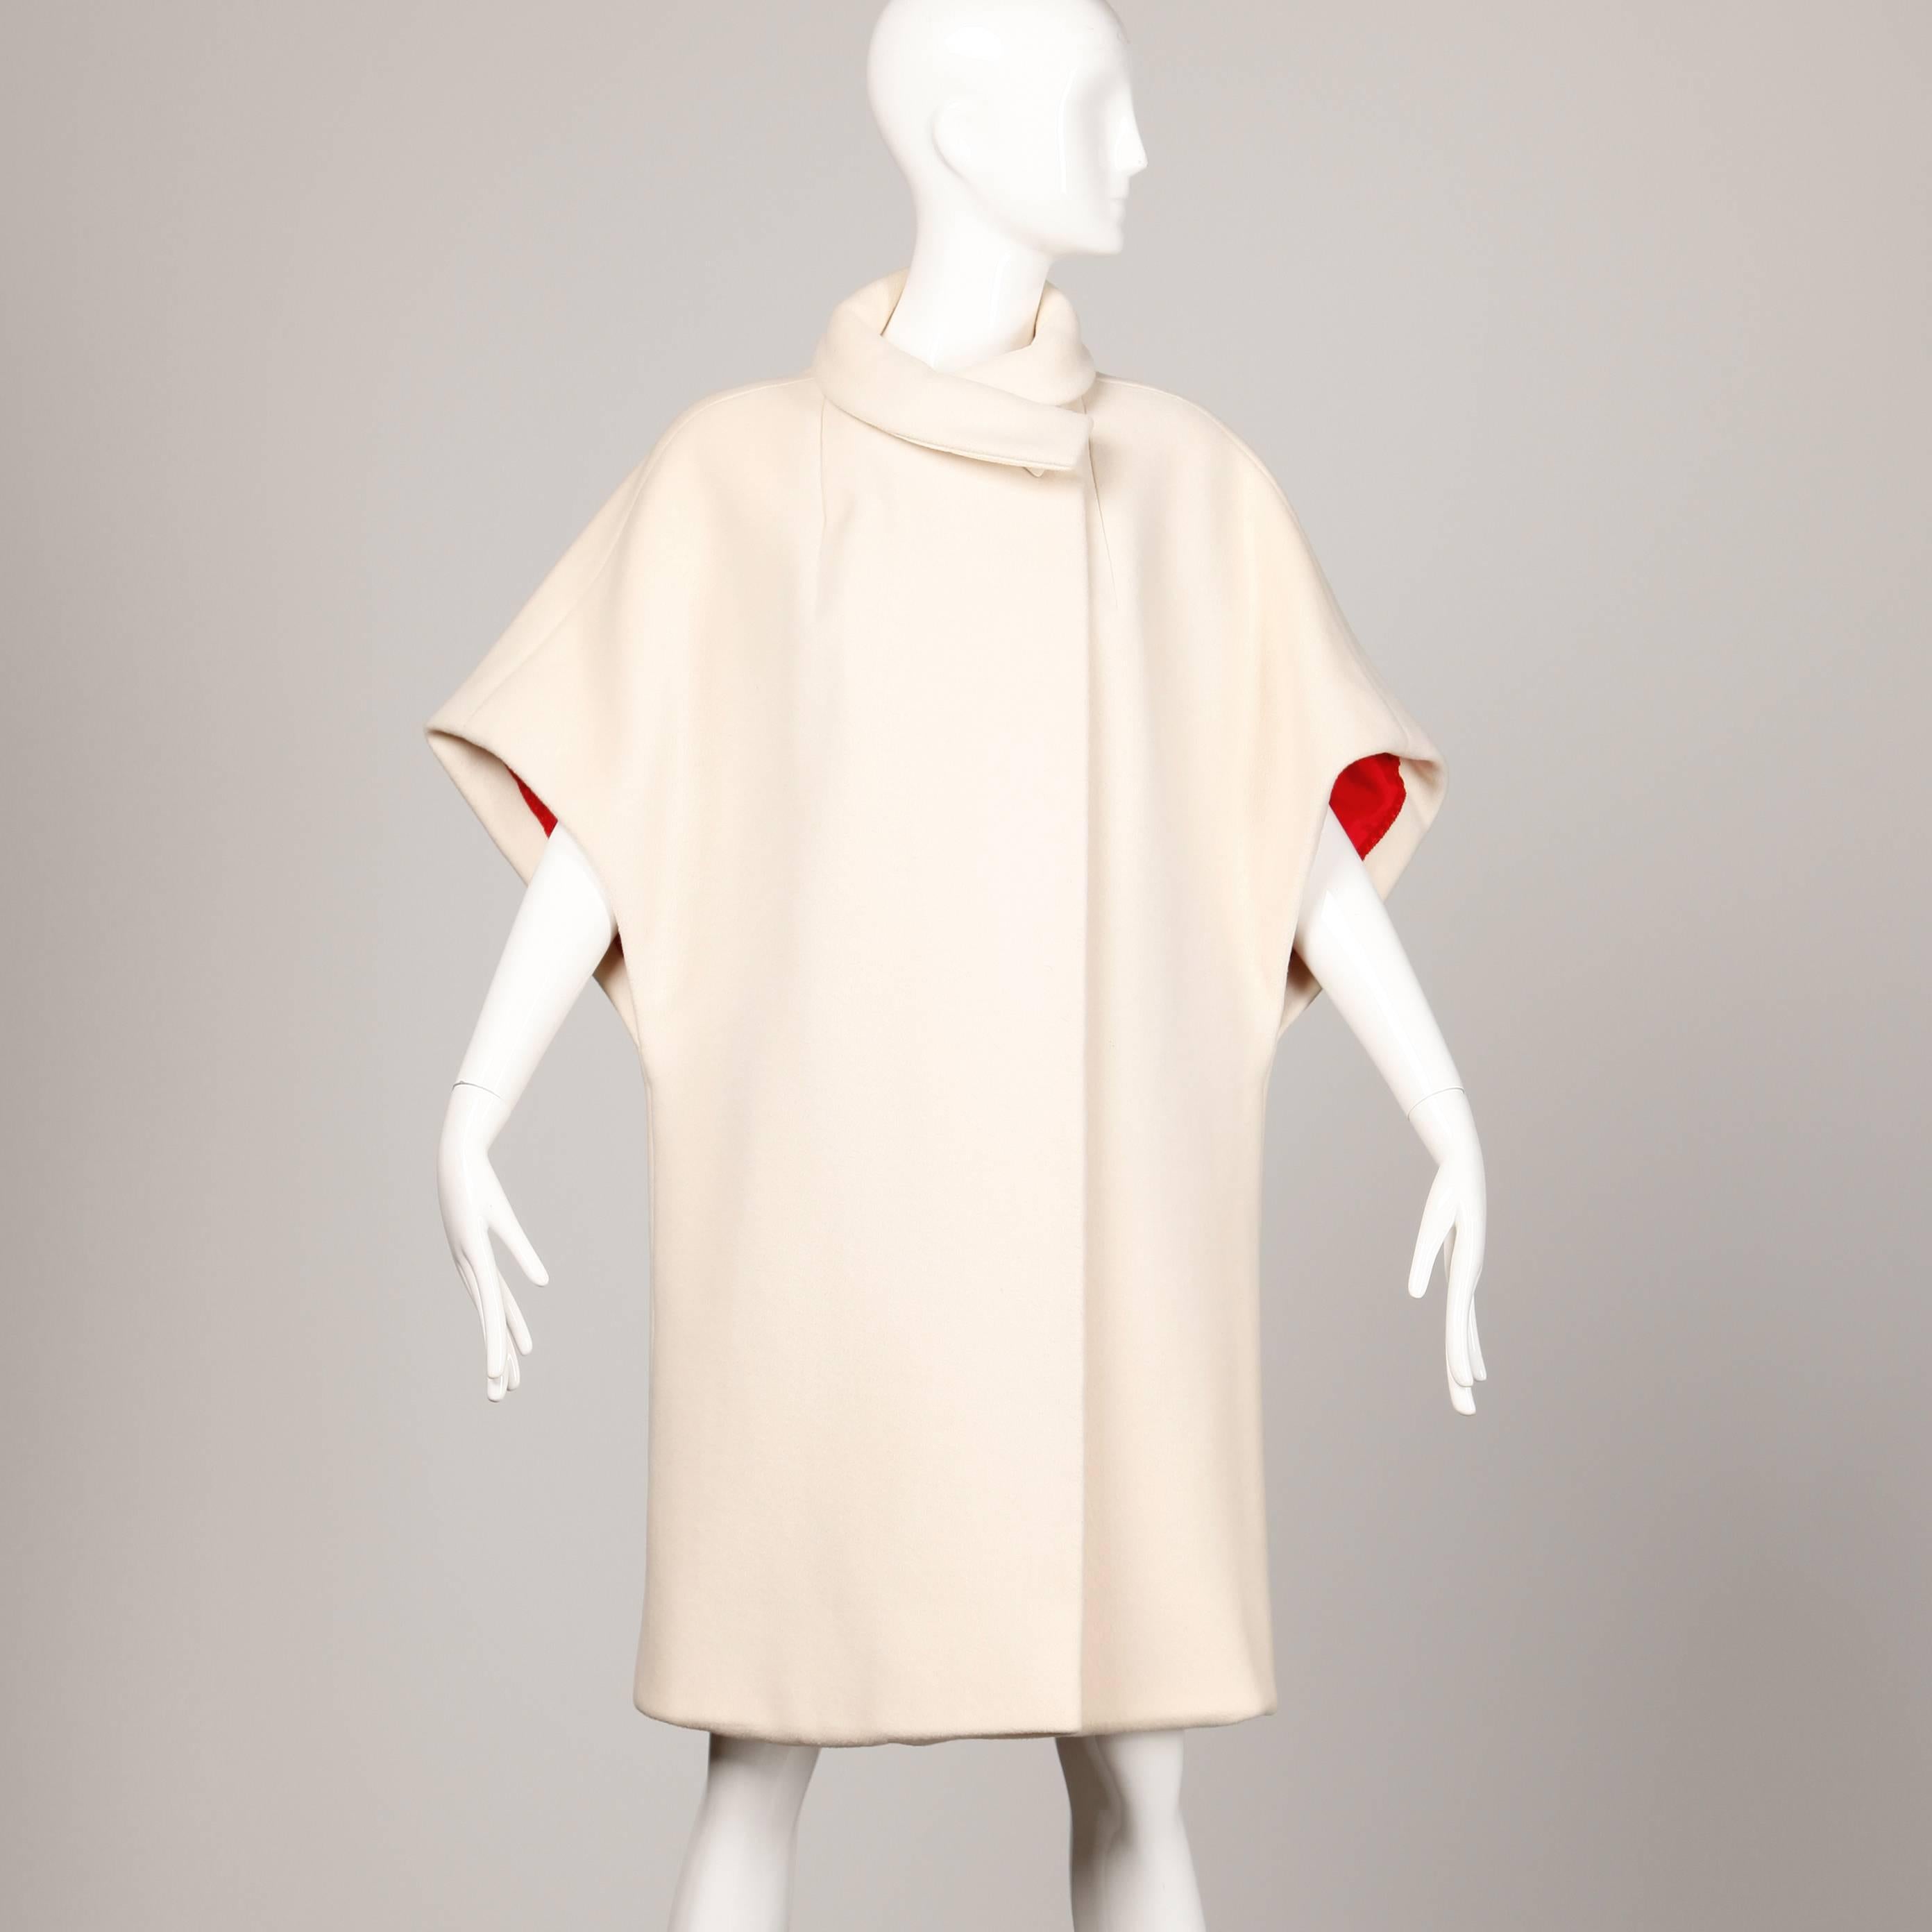 Stunning 1960s cape coat in ivory wool by Via Veneto for Milgrim. Cherry red lining and asymmetric front button closure. The marked size is 10 and the coat fits like a modern size small-medium (forgiving fit). The measurements are as follows: Bust-